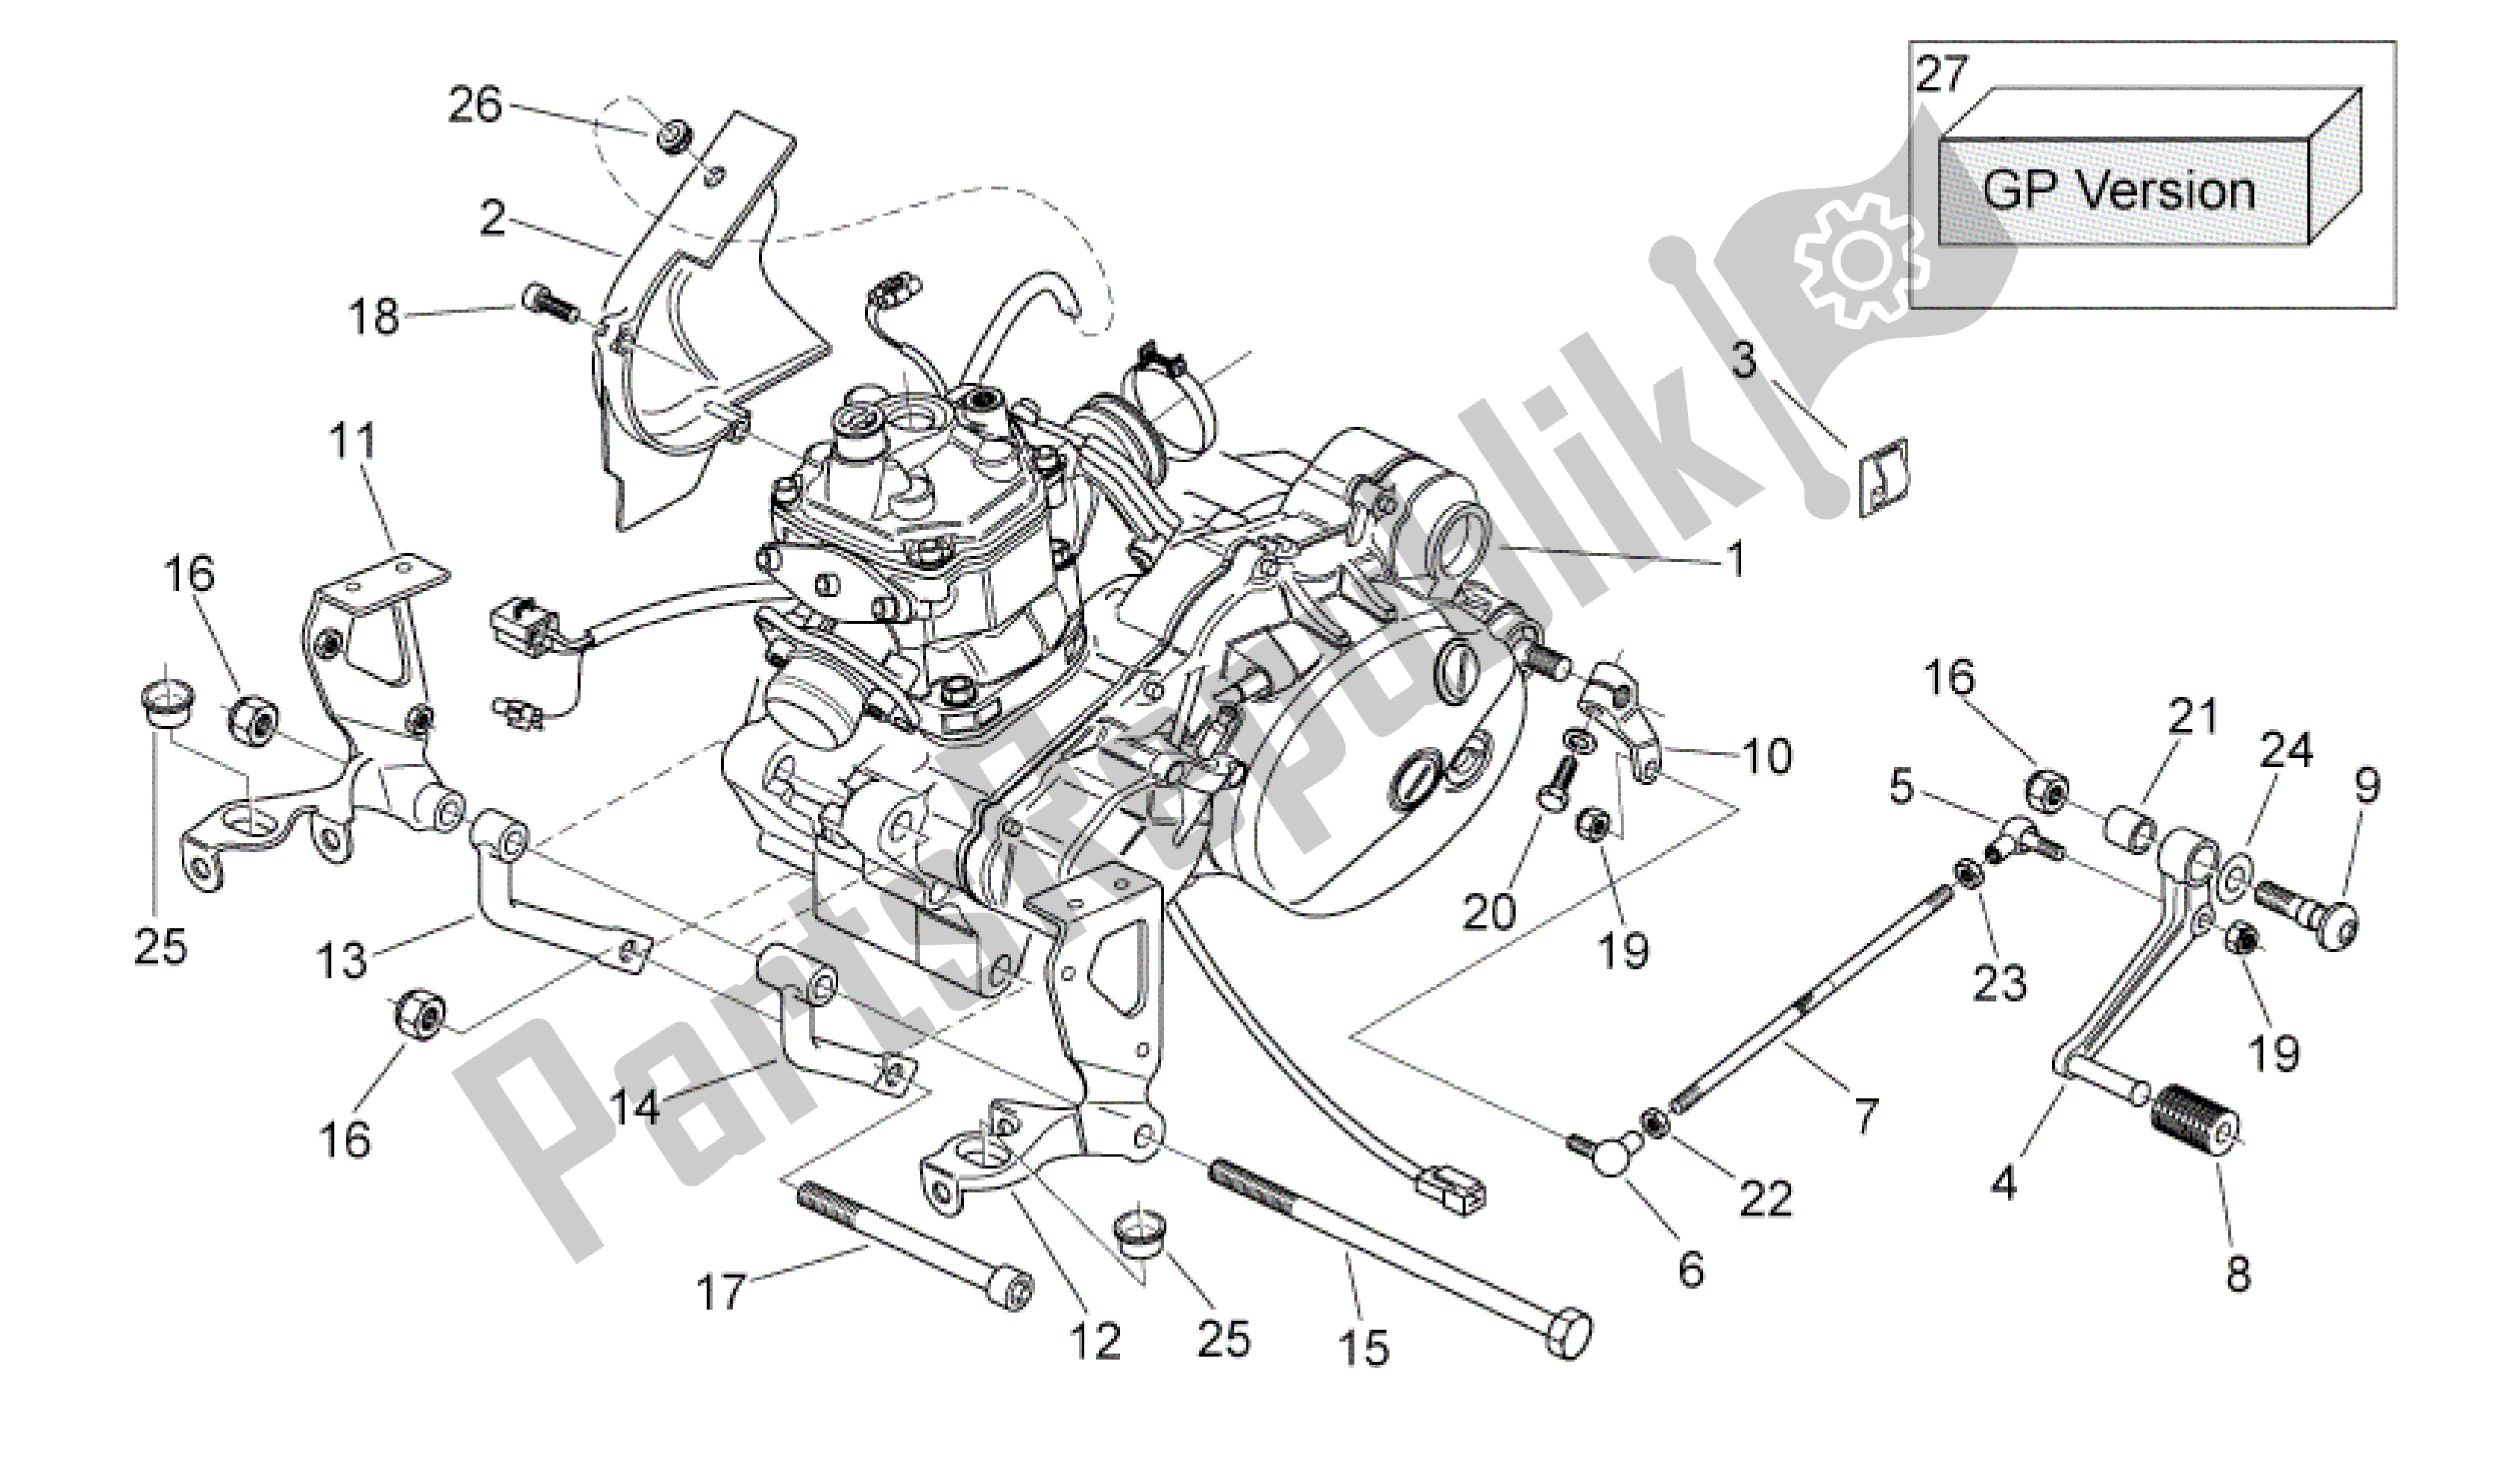 All parts for the Motor of the Aprilia RS 125 2006 - 2010